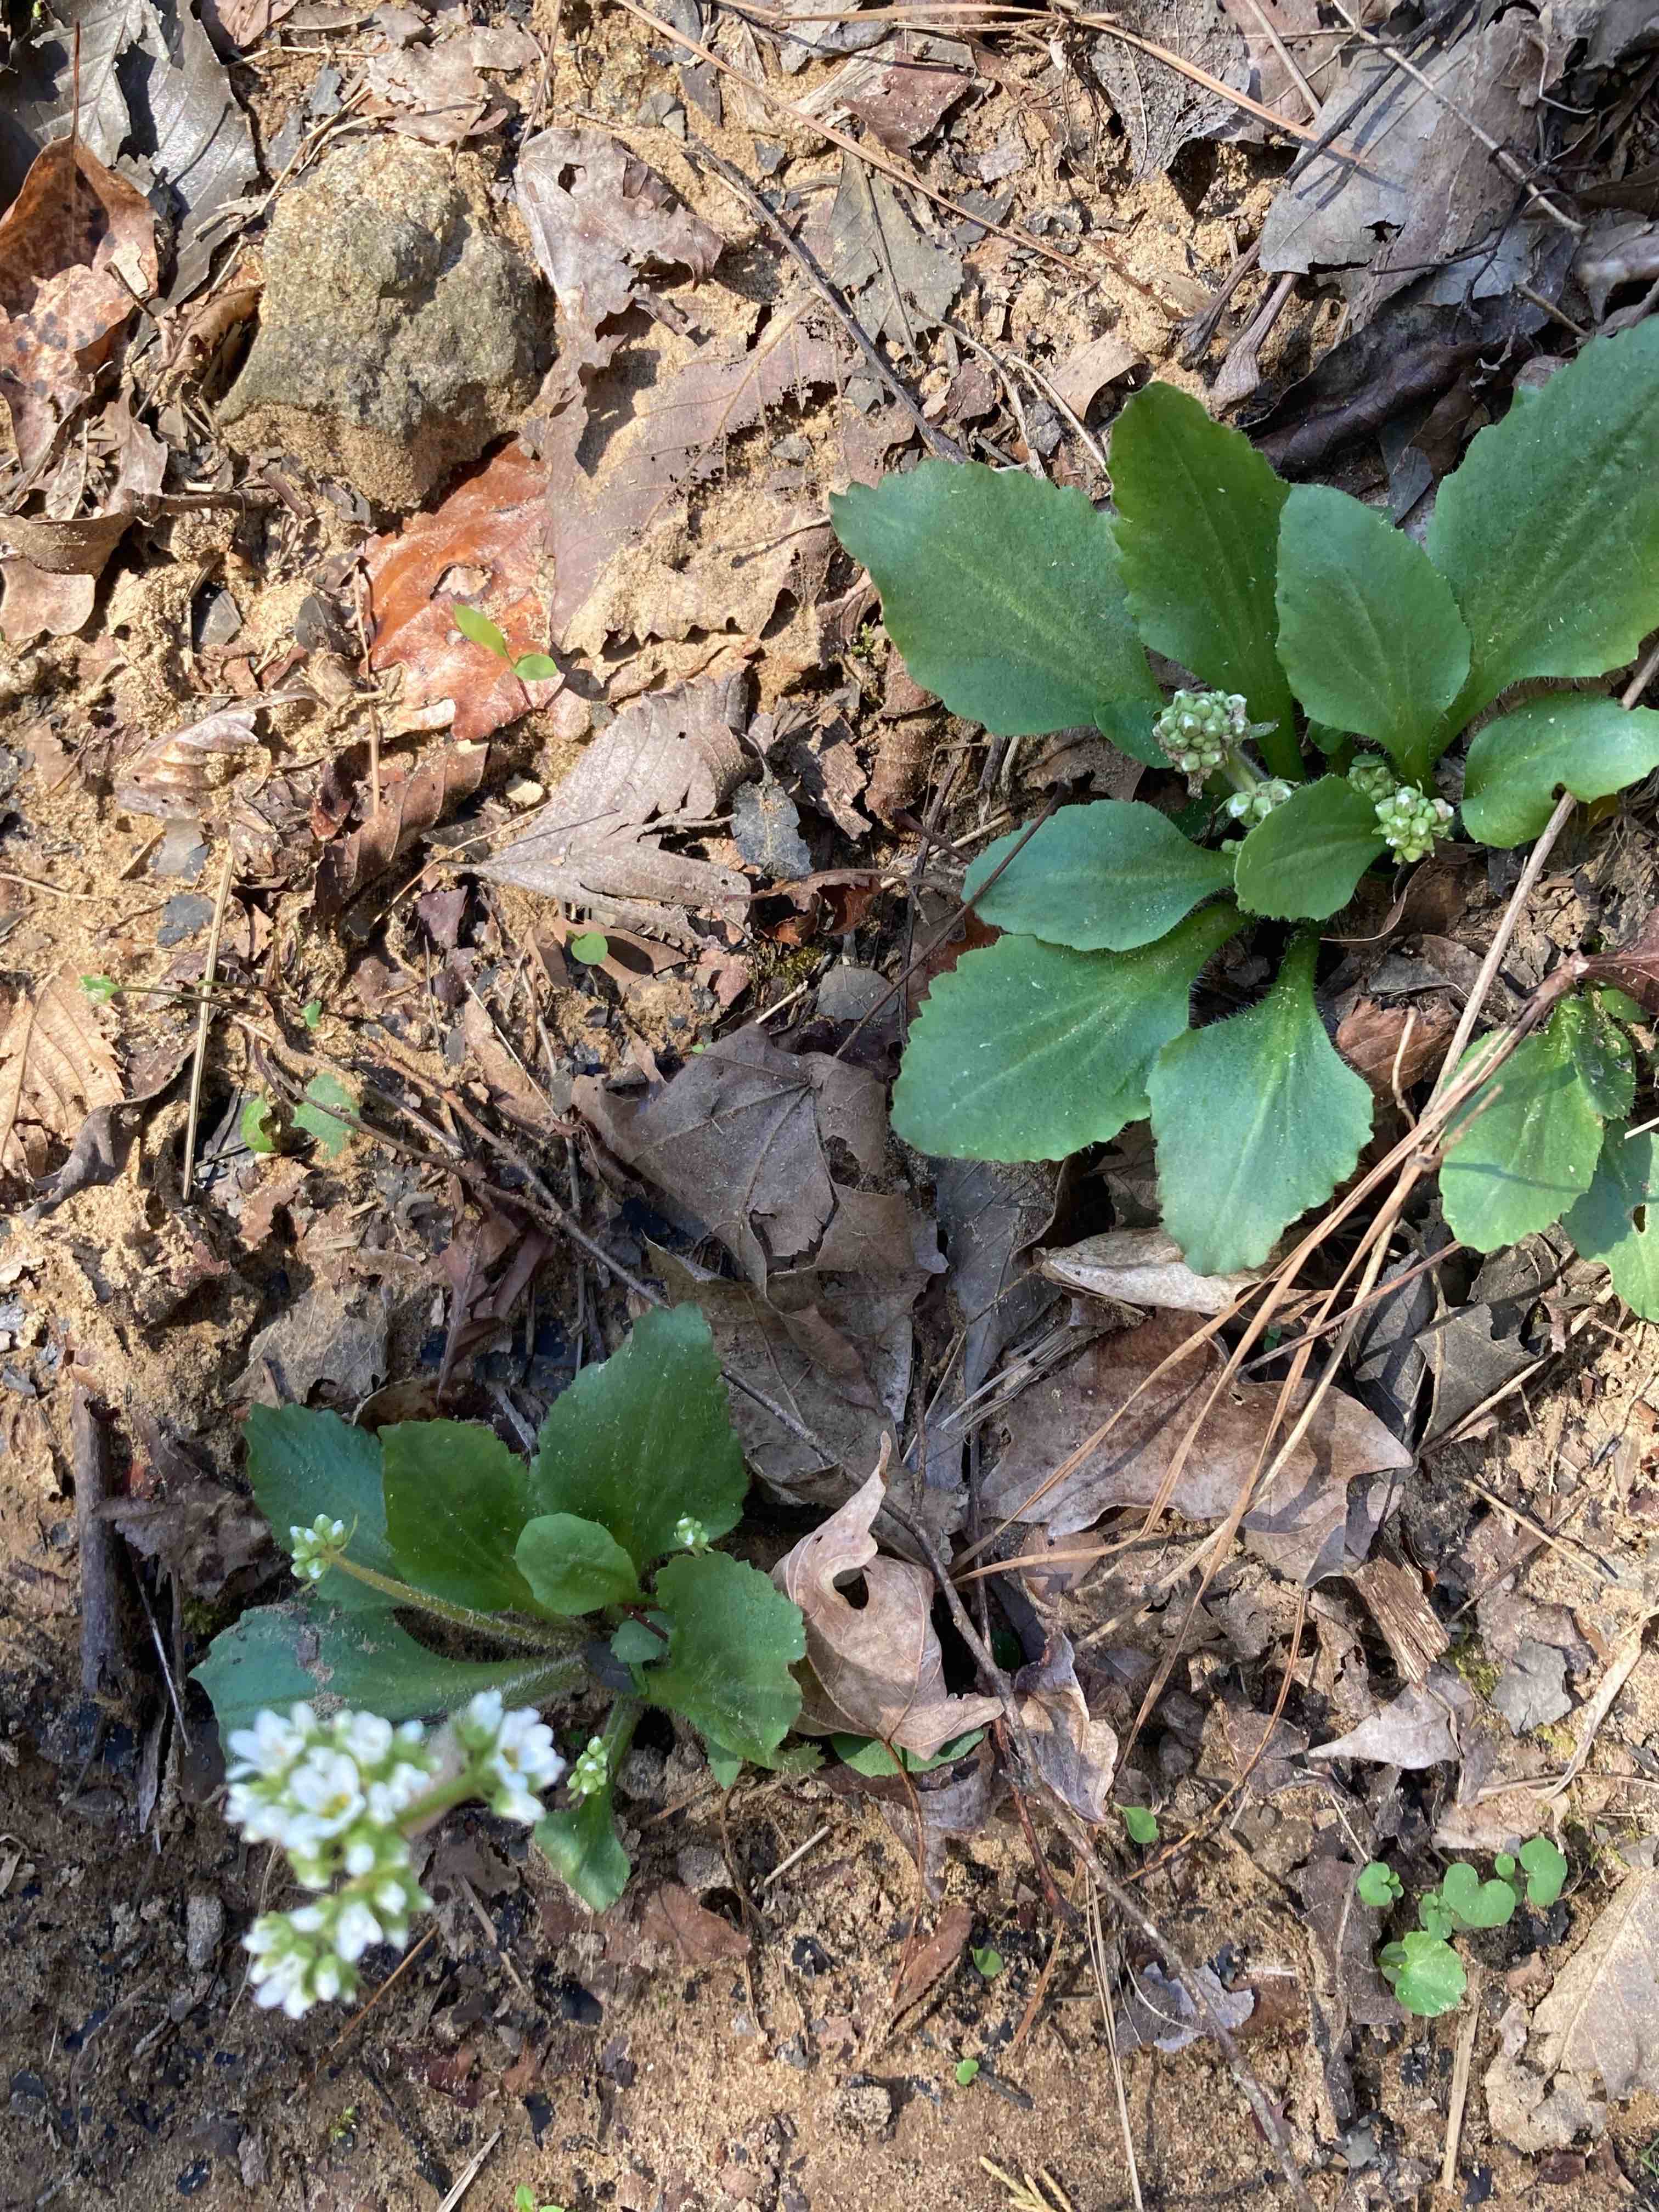 The Scientific Name is Micranthes virginiensis [= Saxifraga virginiensis]. You will likely hear them called Early Saxifrage. This picture shows the Basal rosette of somewhat triangular shaped serrated leaves. of Micranthes virginiensis [= Saxifraga virginiensis]